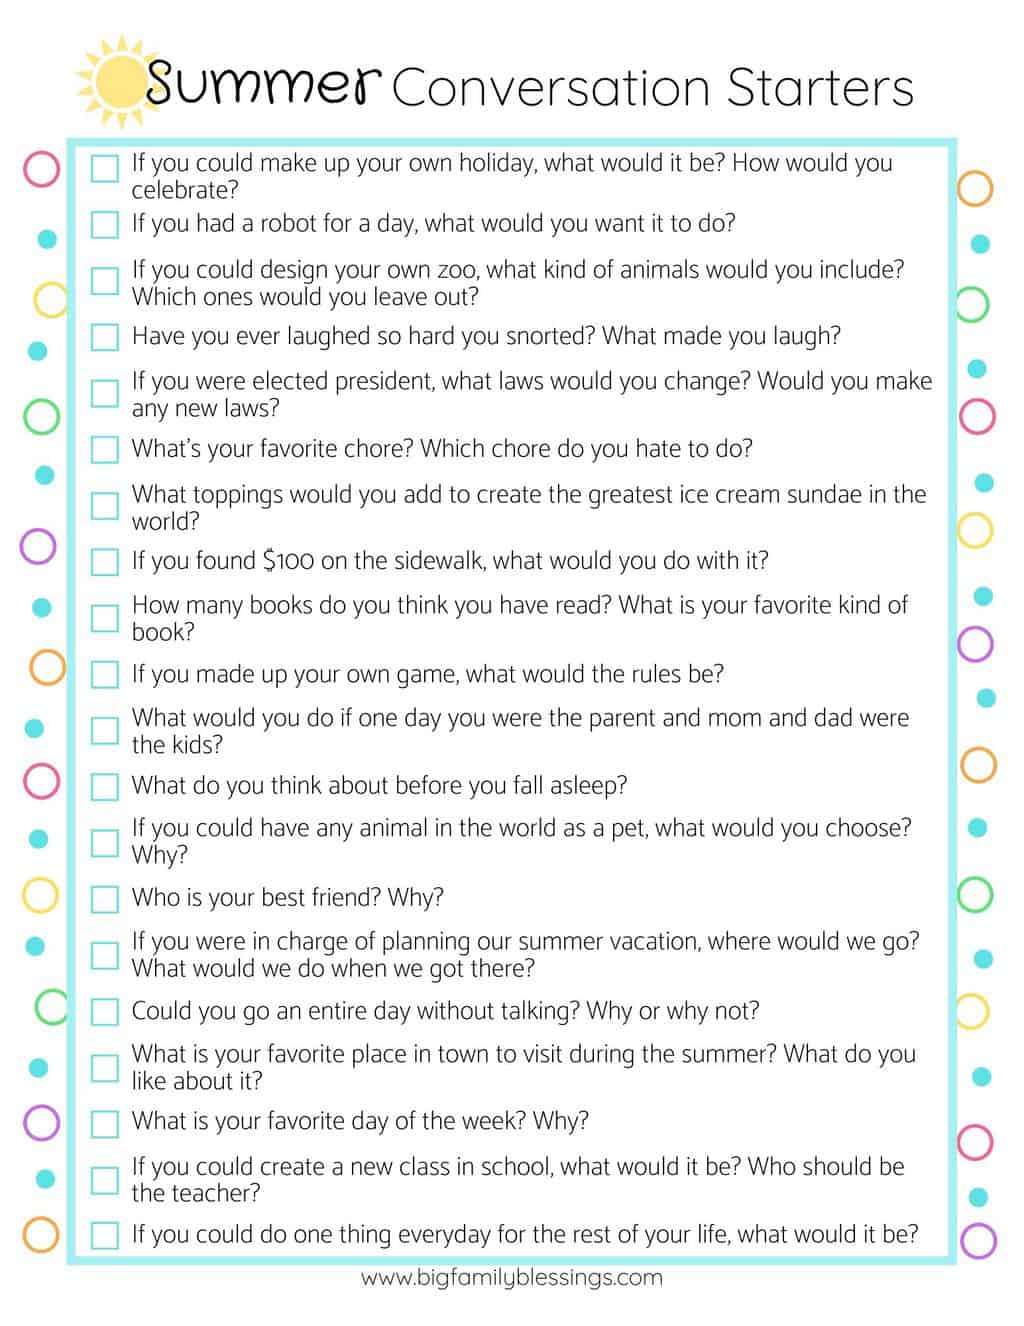 20 Fun Conversation Starters to Get Your Kids Talking This Summer - Big ...